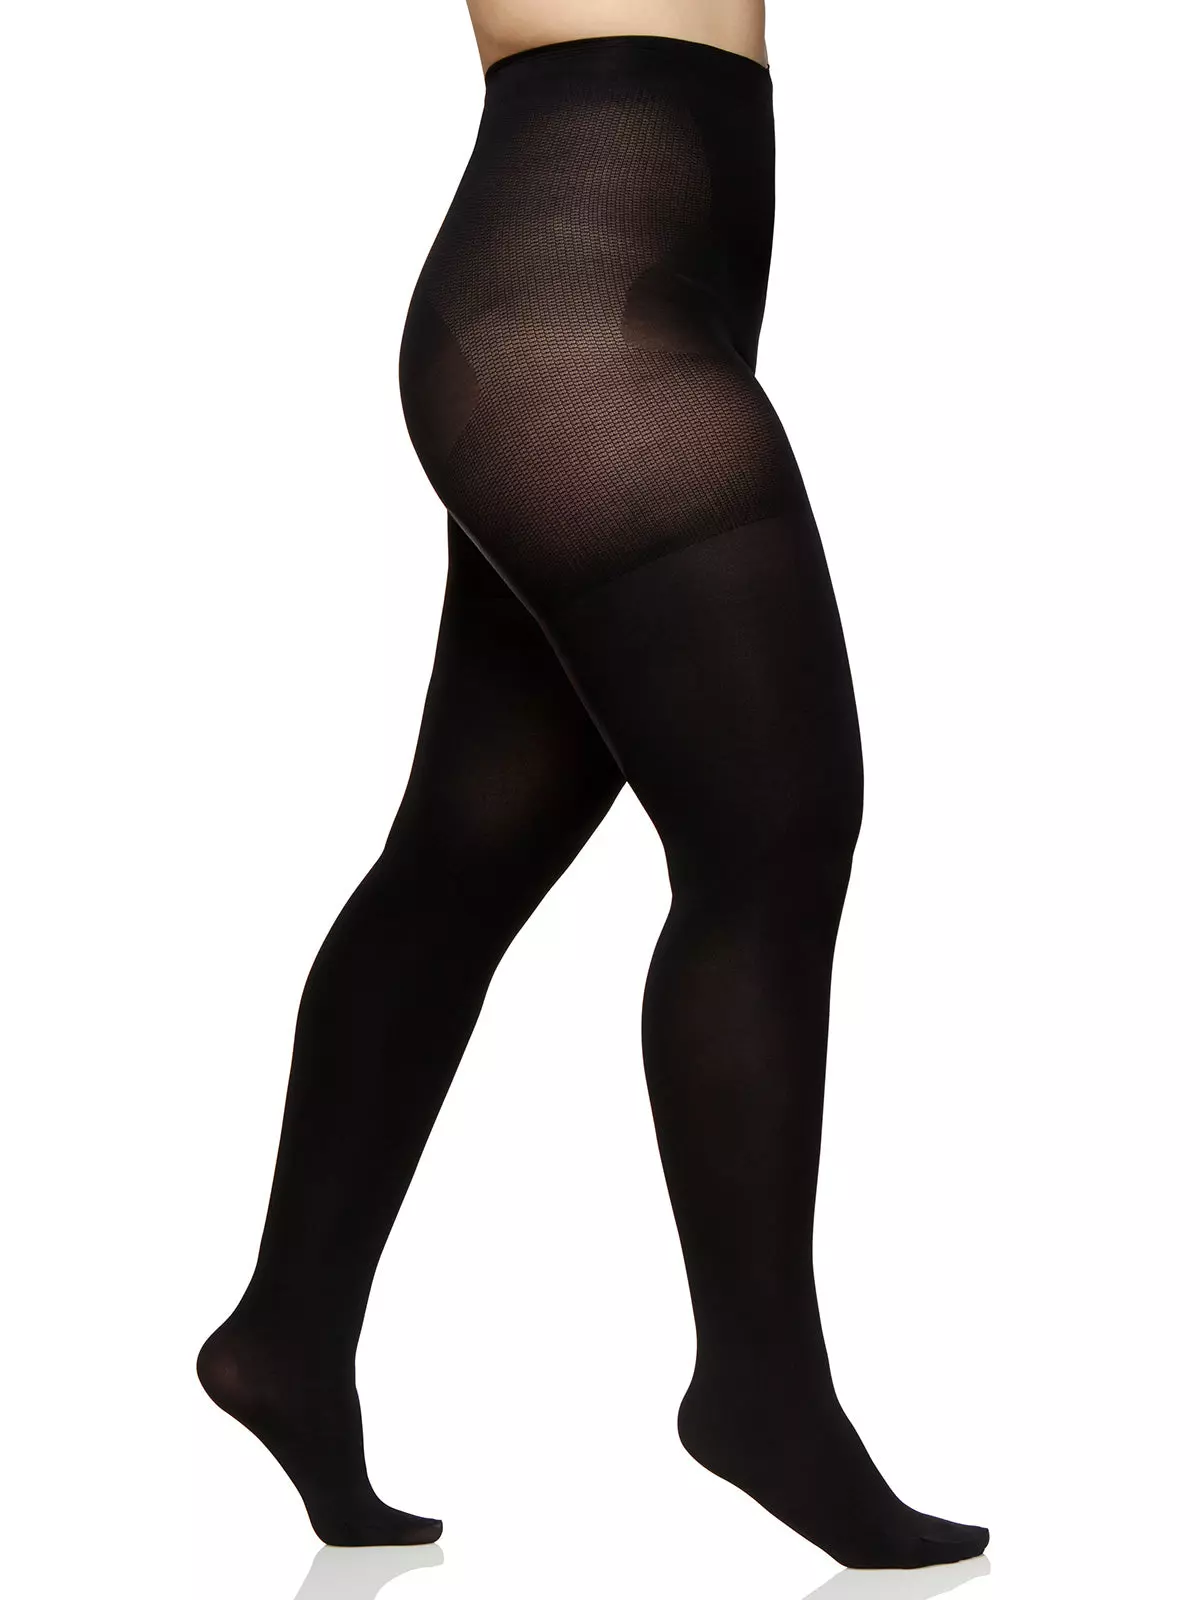 Berkshire Women's Plus Size Easy-On Maximum Coverage Tights